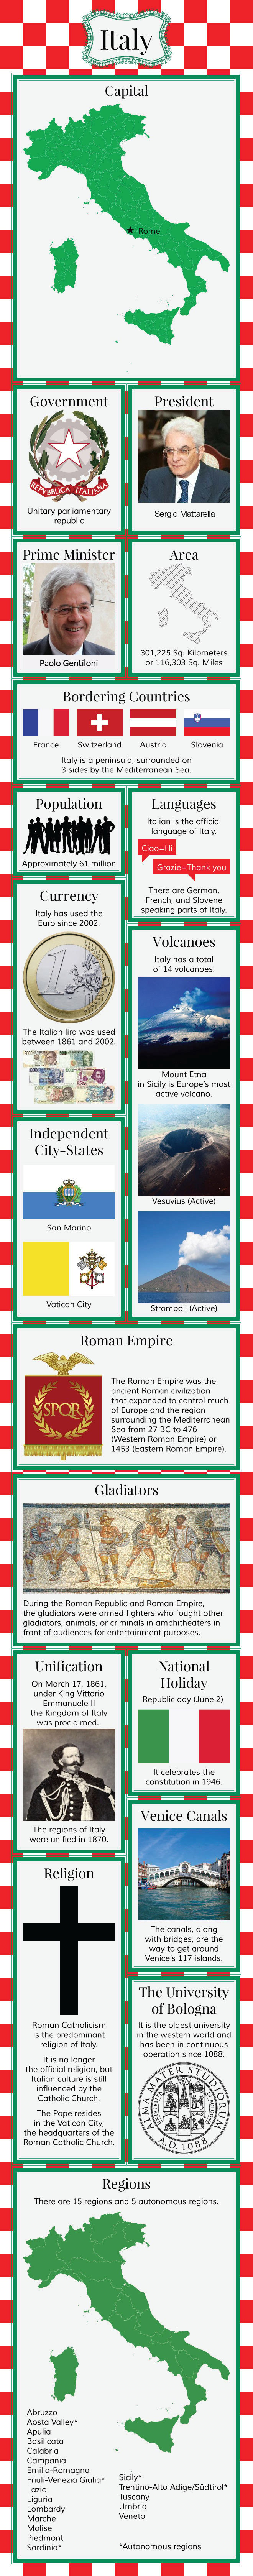 Infographic on Italy